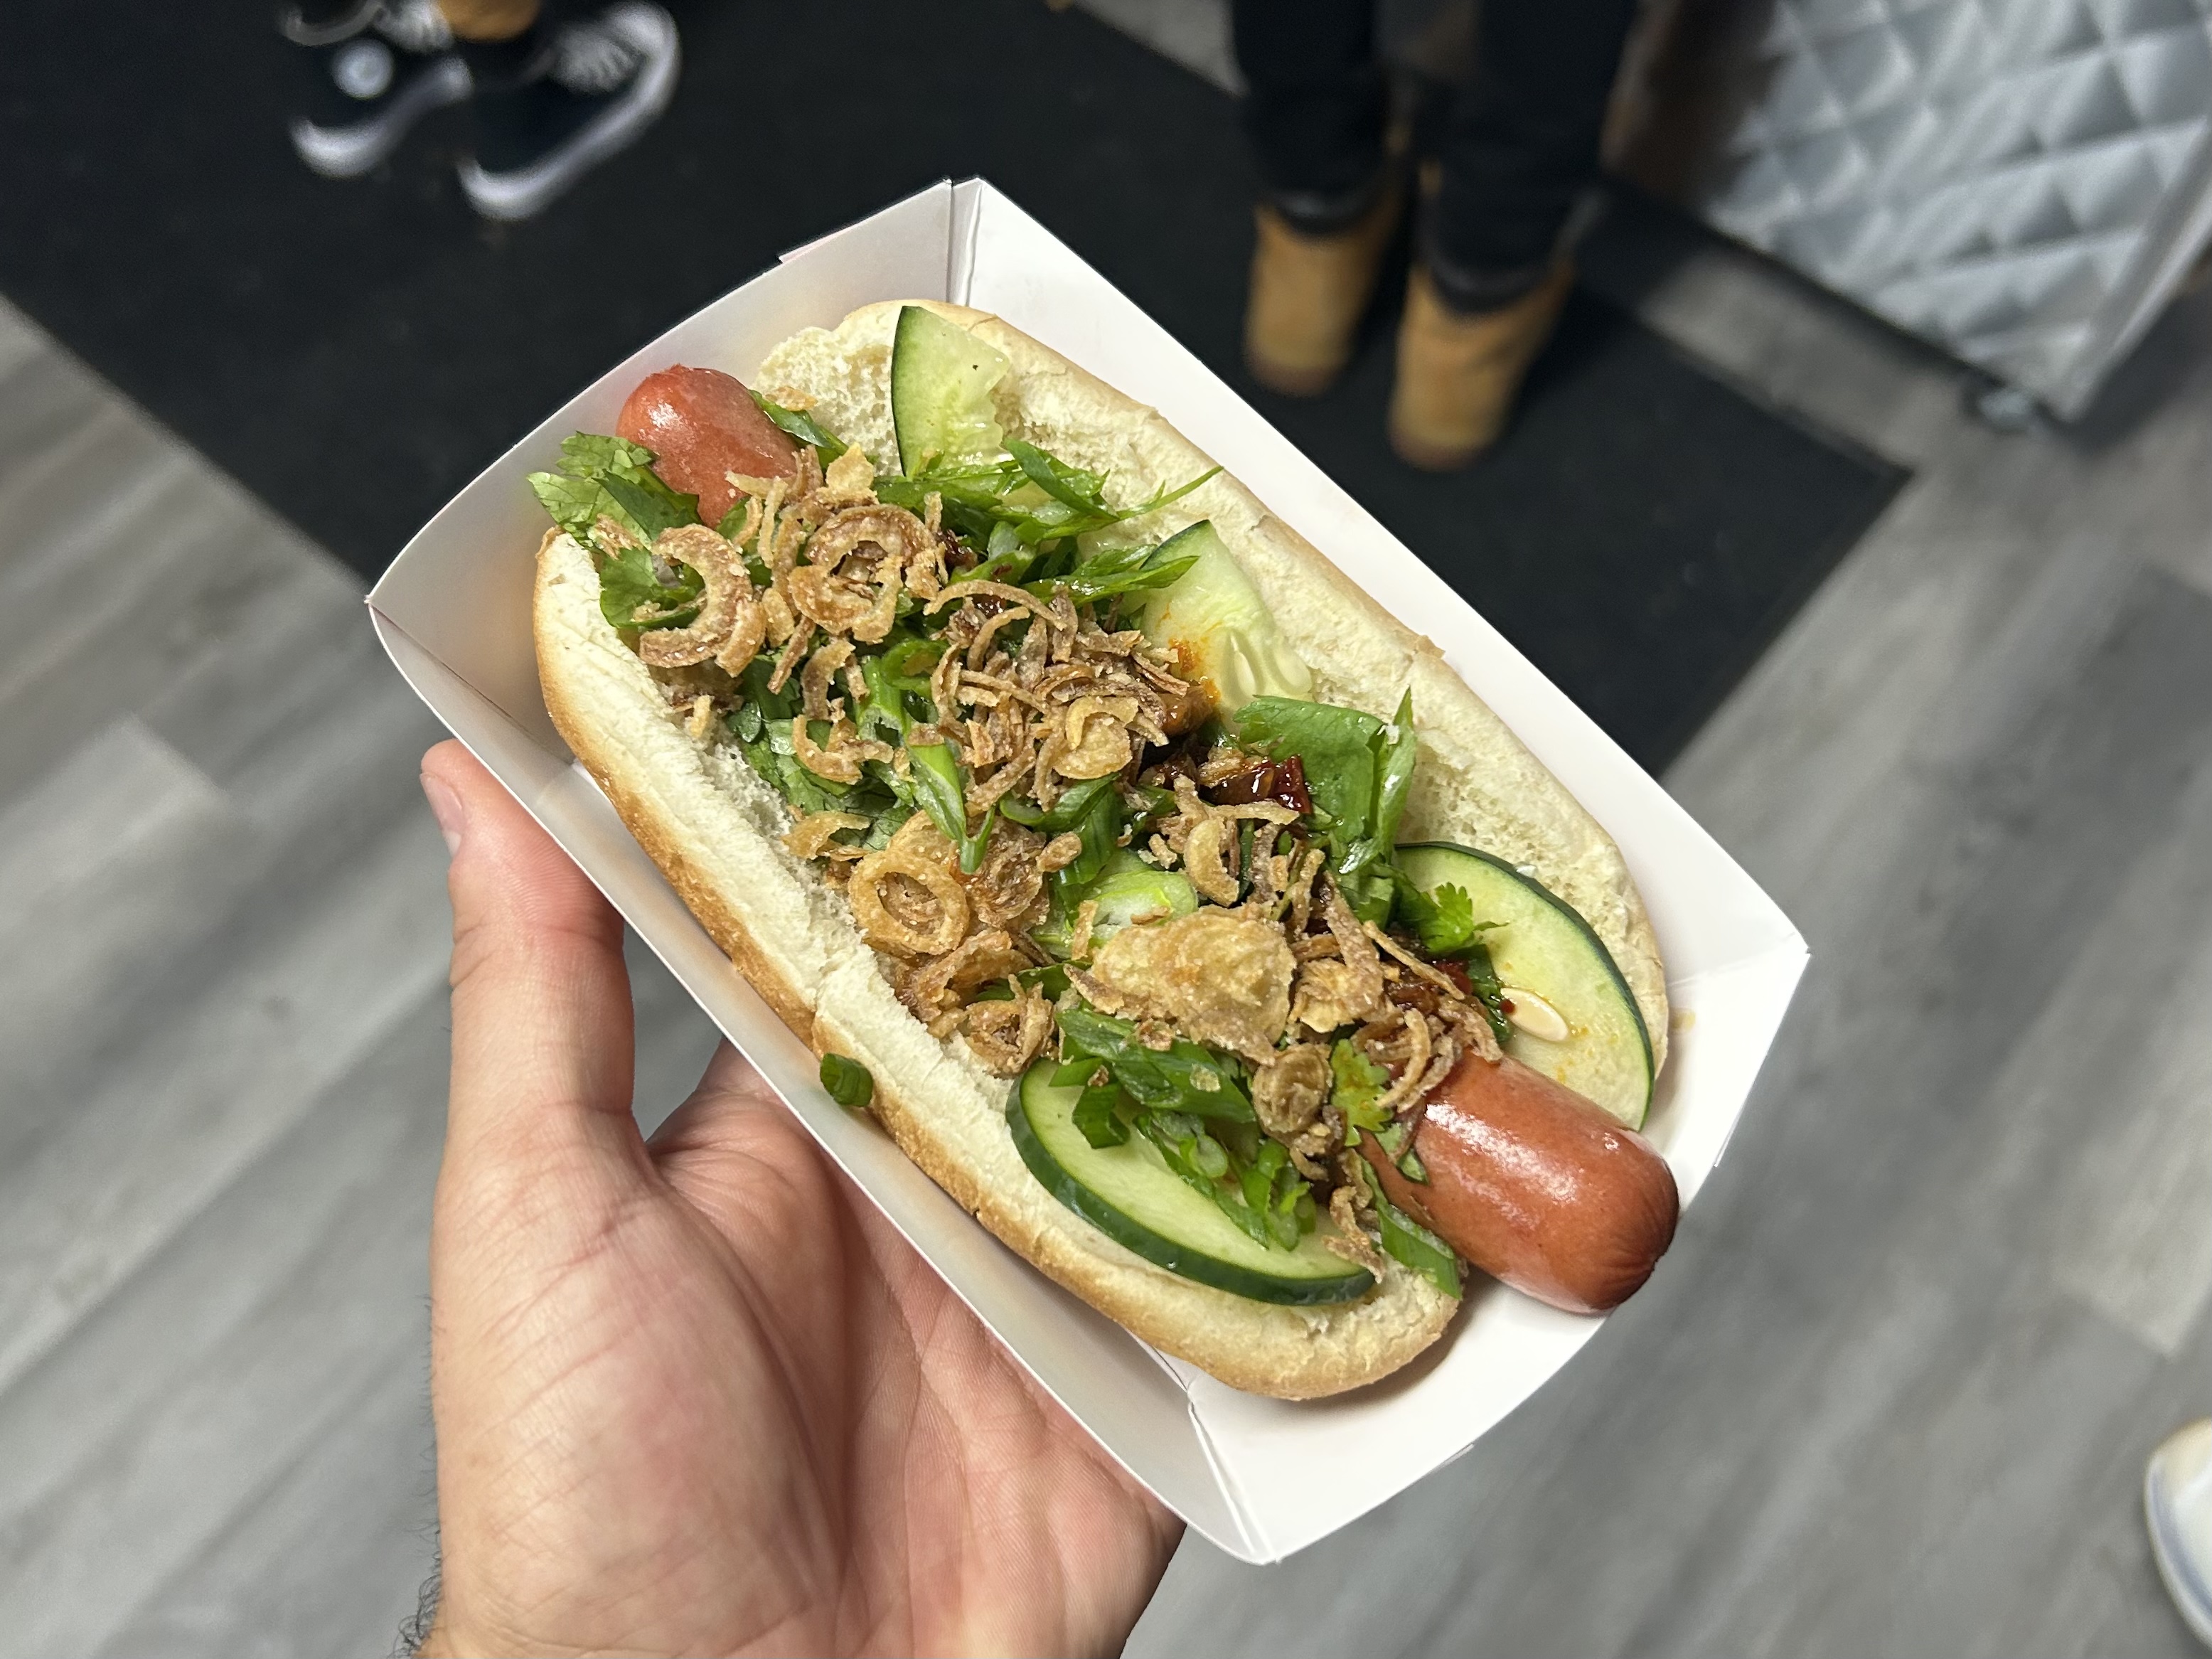 A hot dog loaded with fried shallots, chili crisp, cilantro, and cucumber.